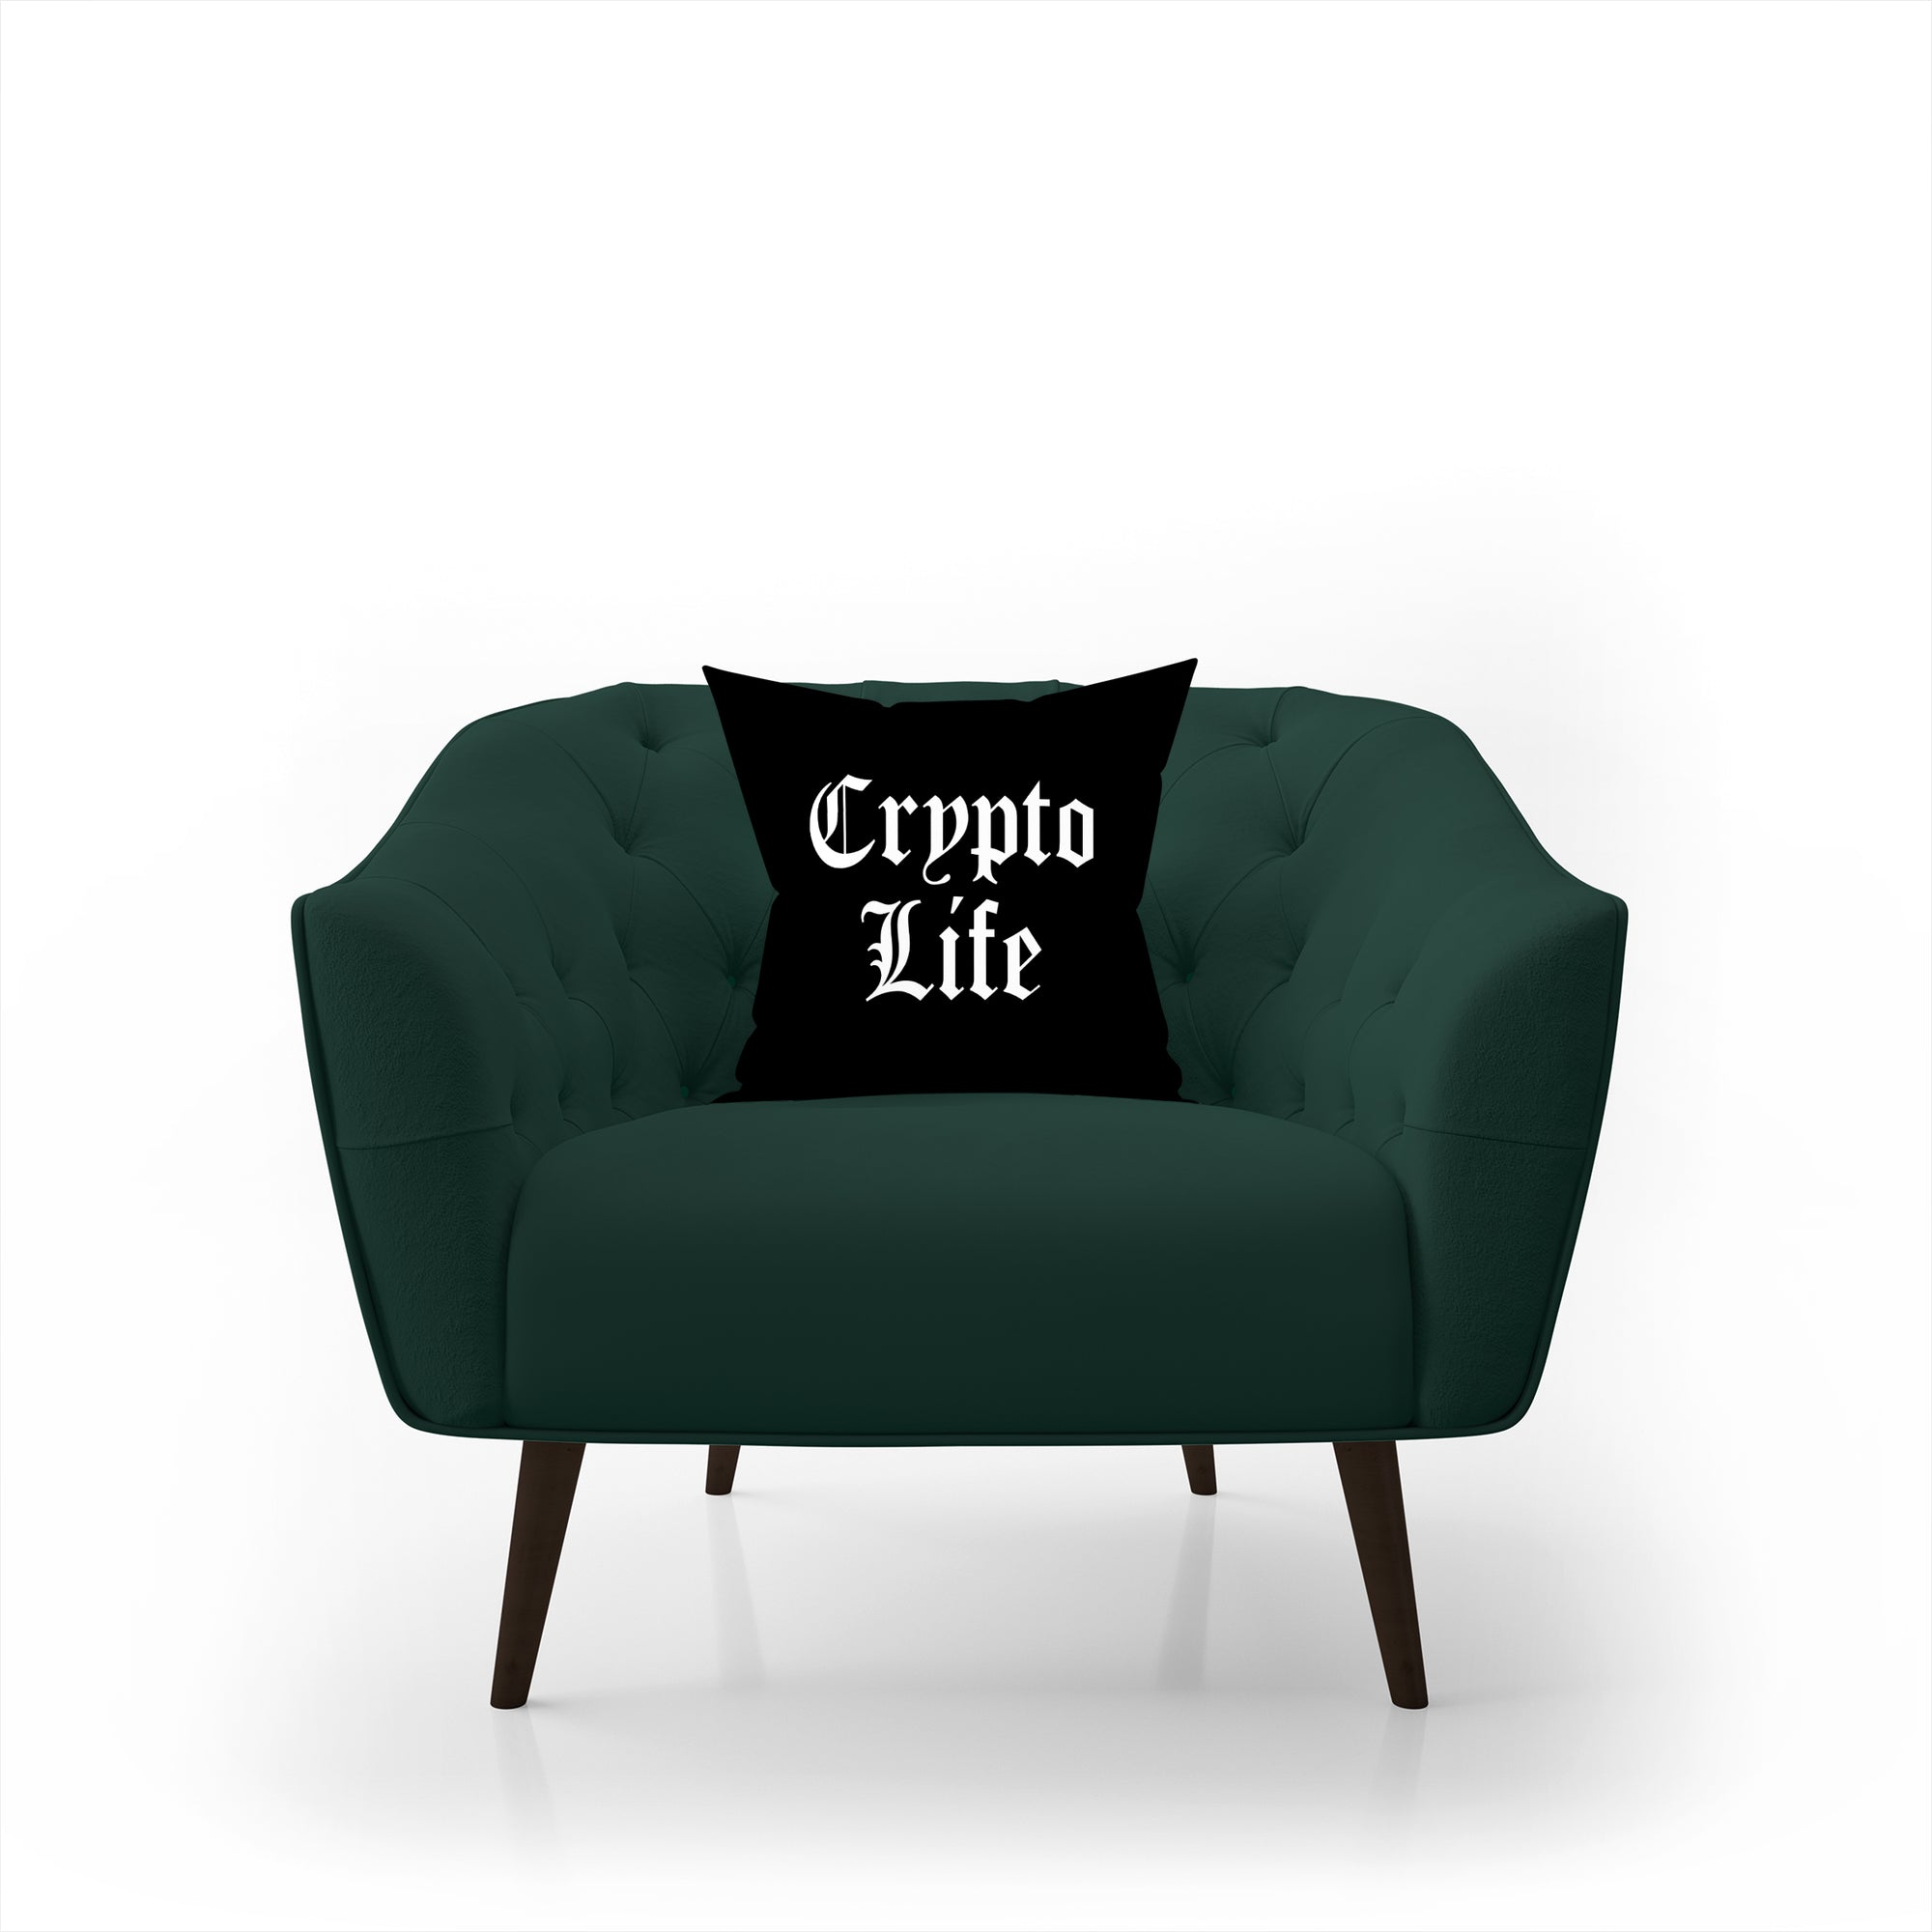 Crypto Merchandise - Crypto Life Pillow displayed on green armchair.